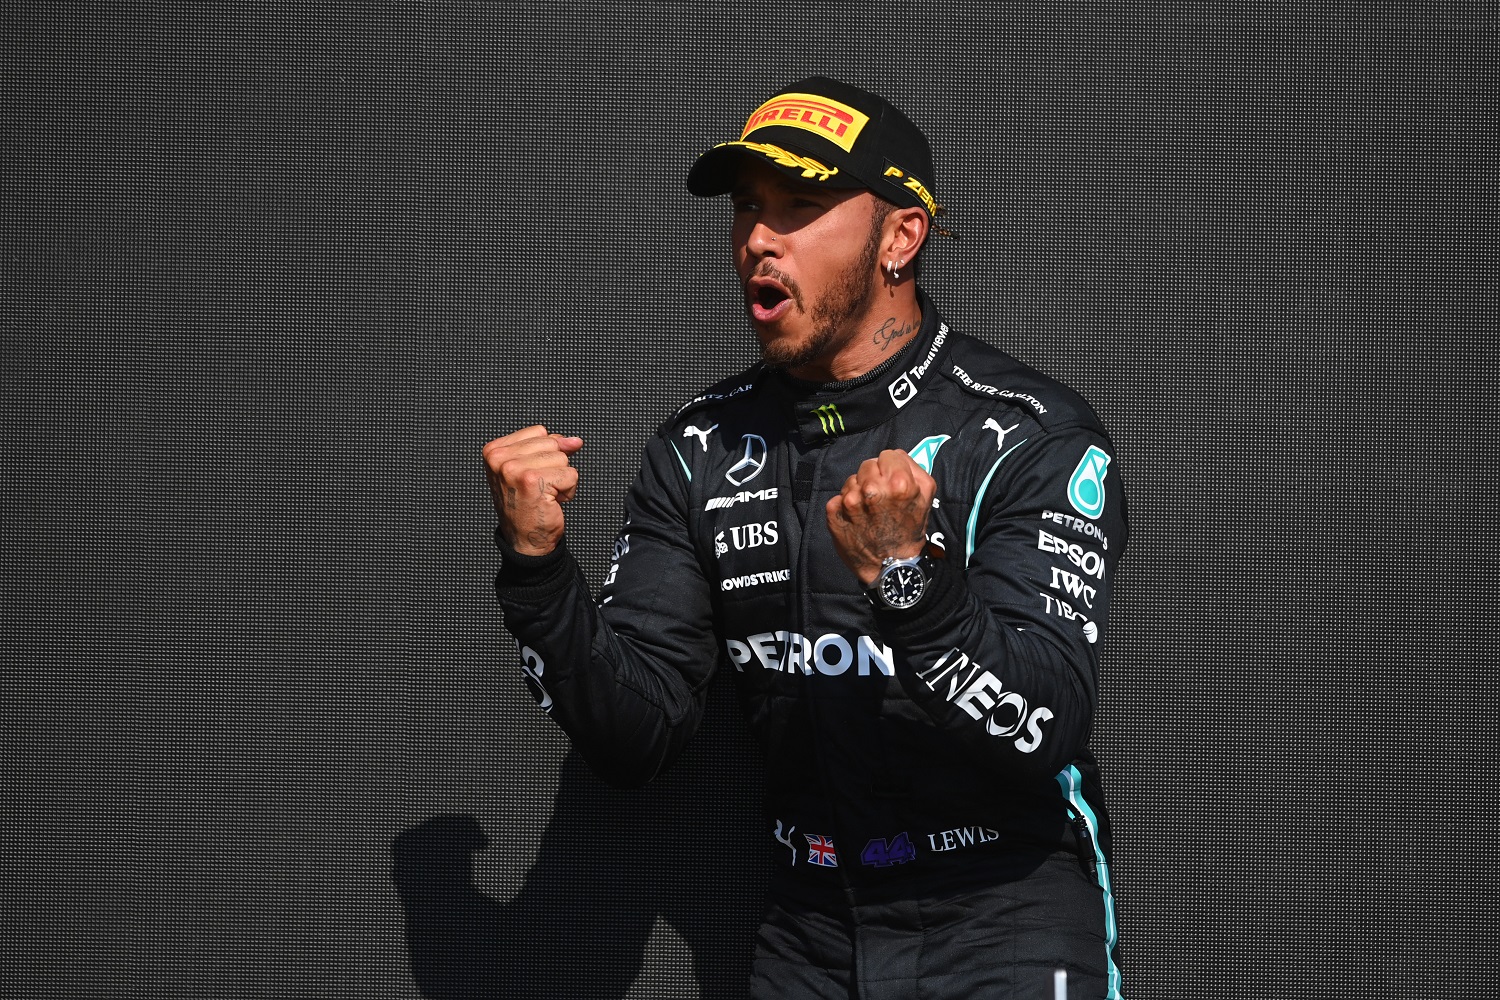 Race winner Lewis Hamilton celebrates on the podium during the Formula 1 Grand Prix of Great Britain at Silverstone on July 18, 2021 in Northampton, England.